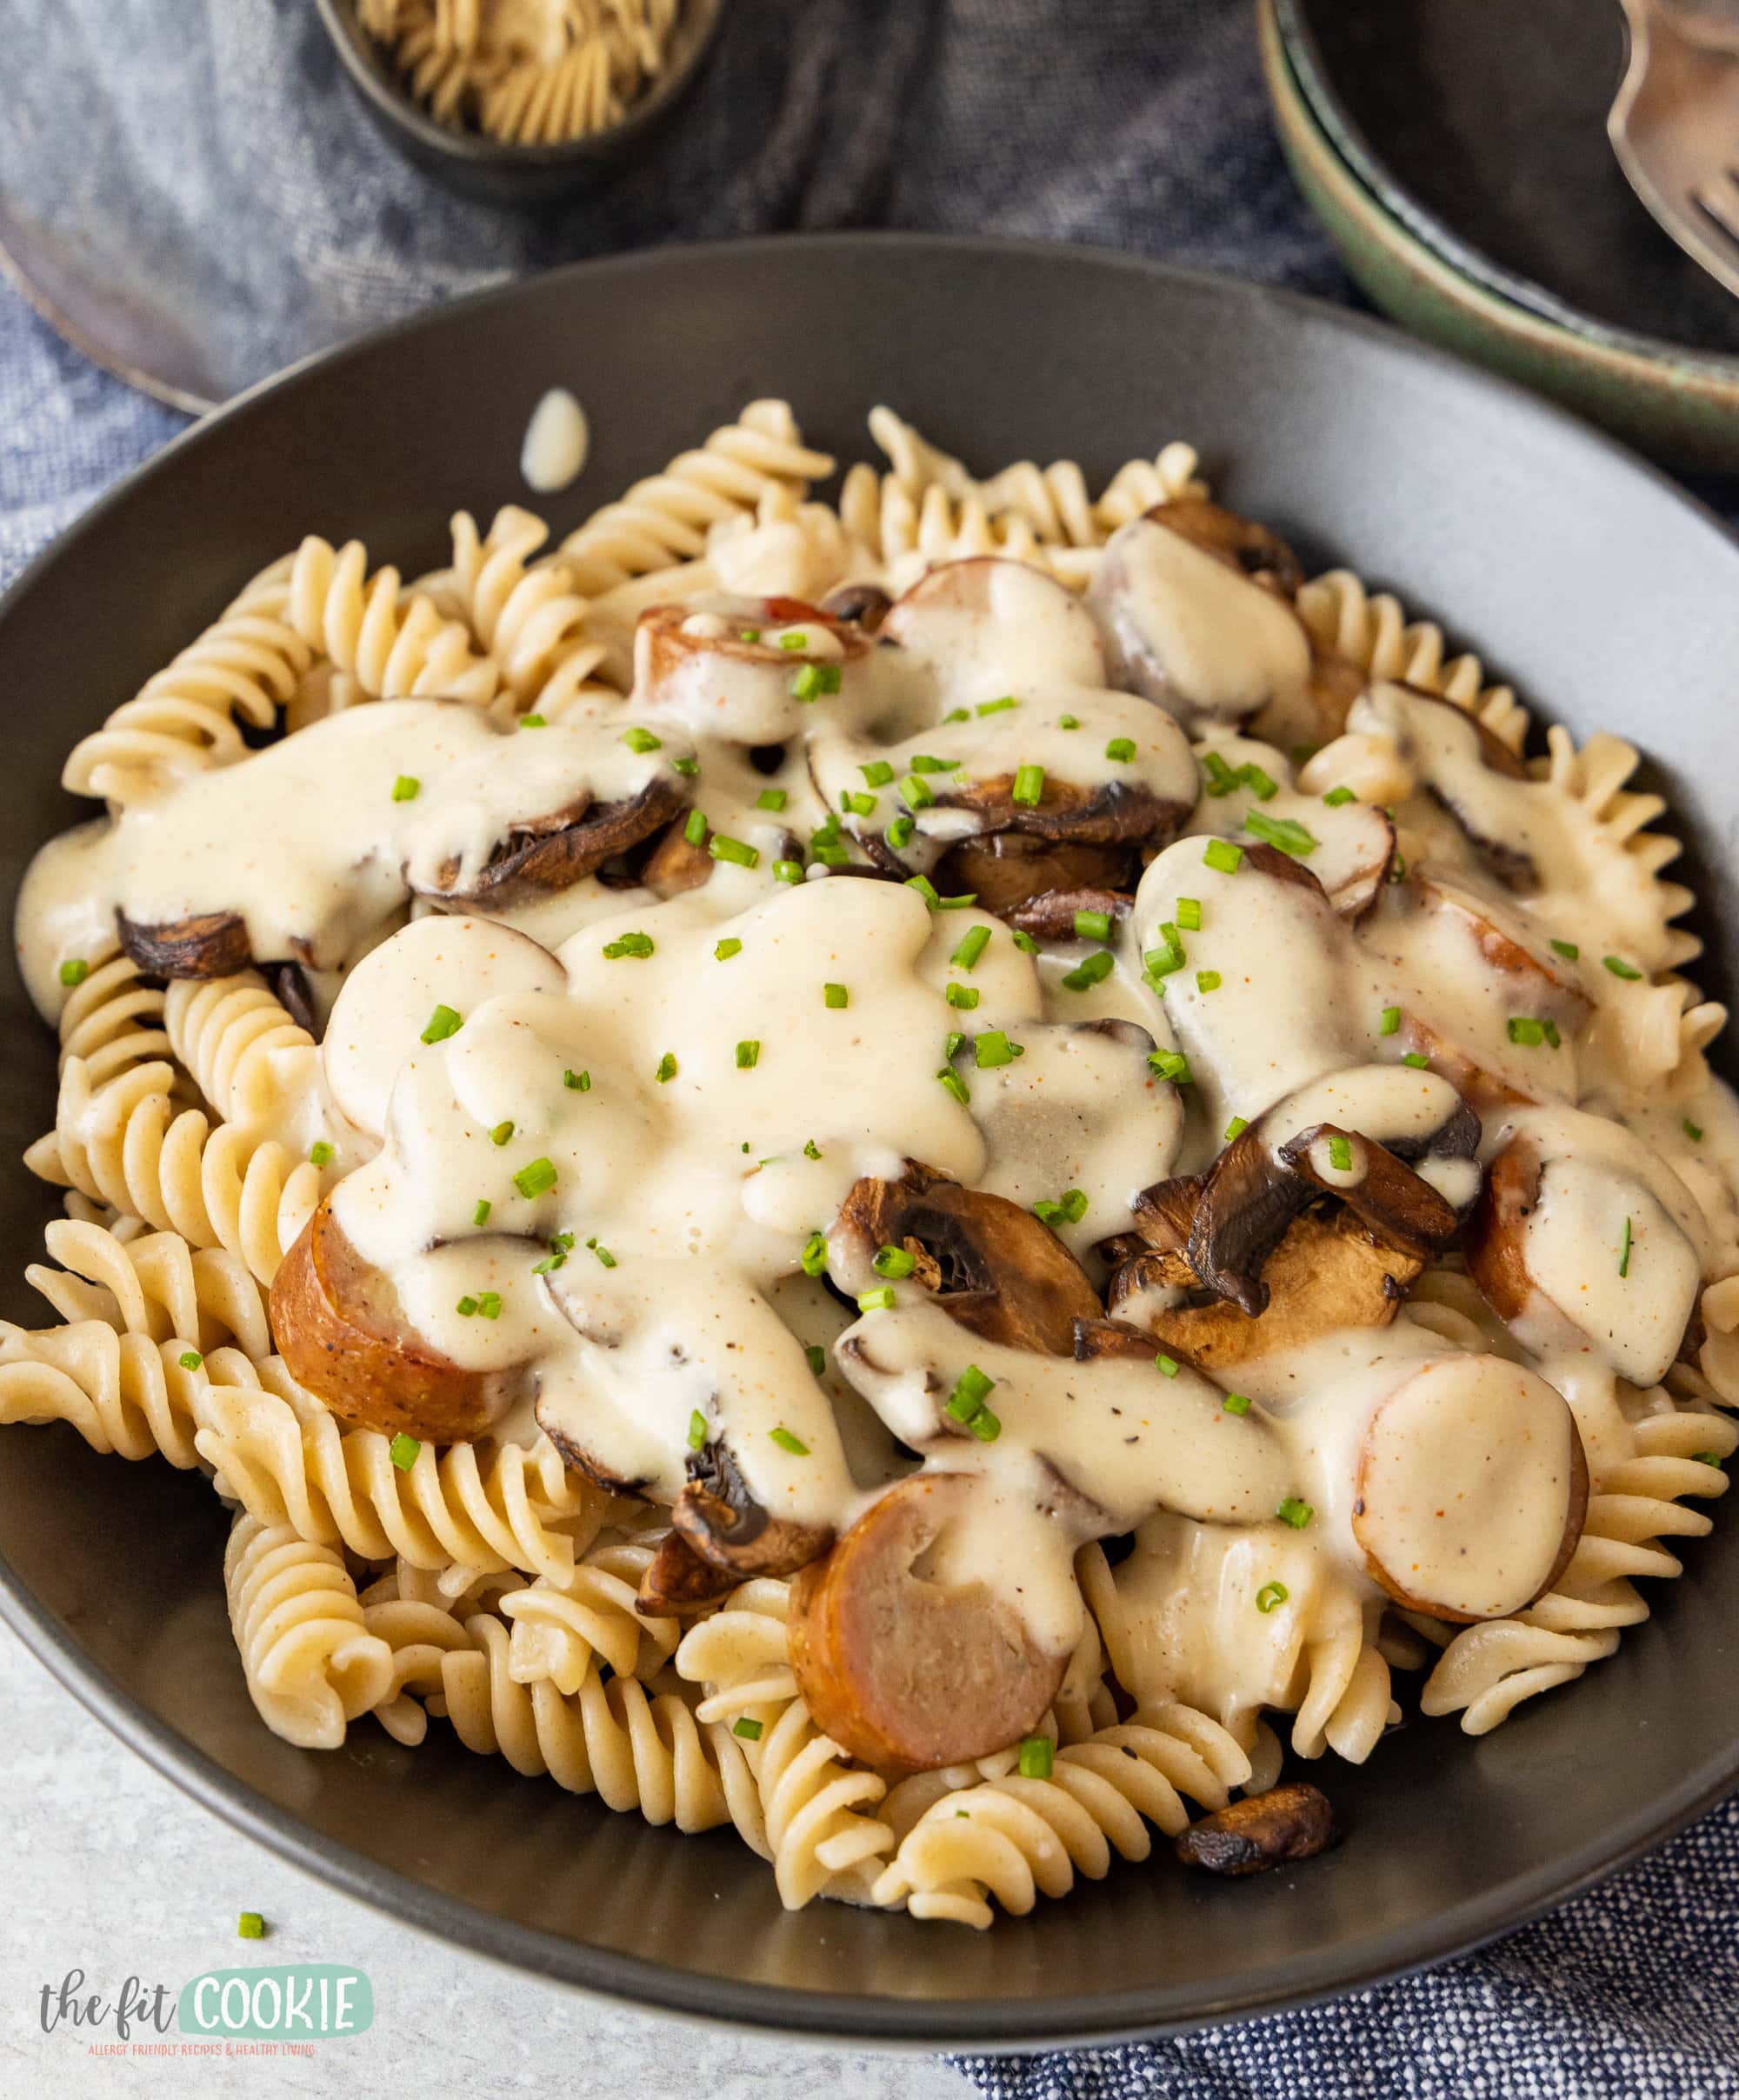 A bowl of alfredo pasta with mushroom sauce and parmesan cheese.